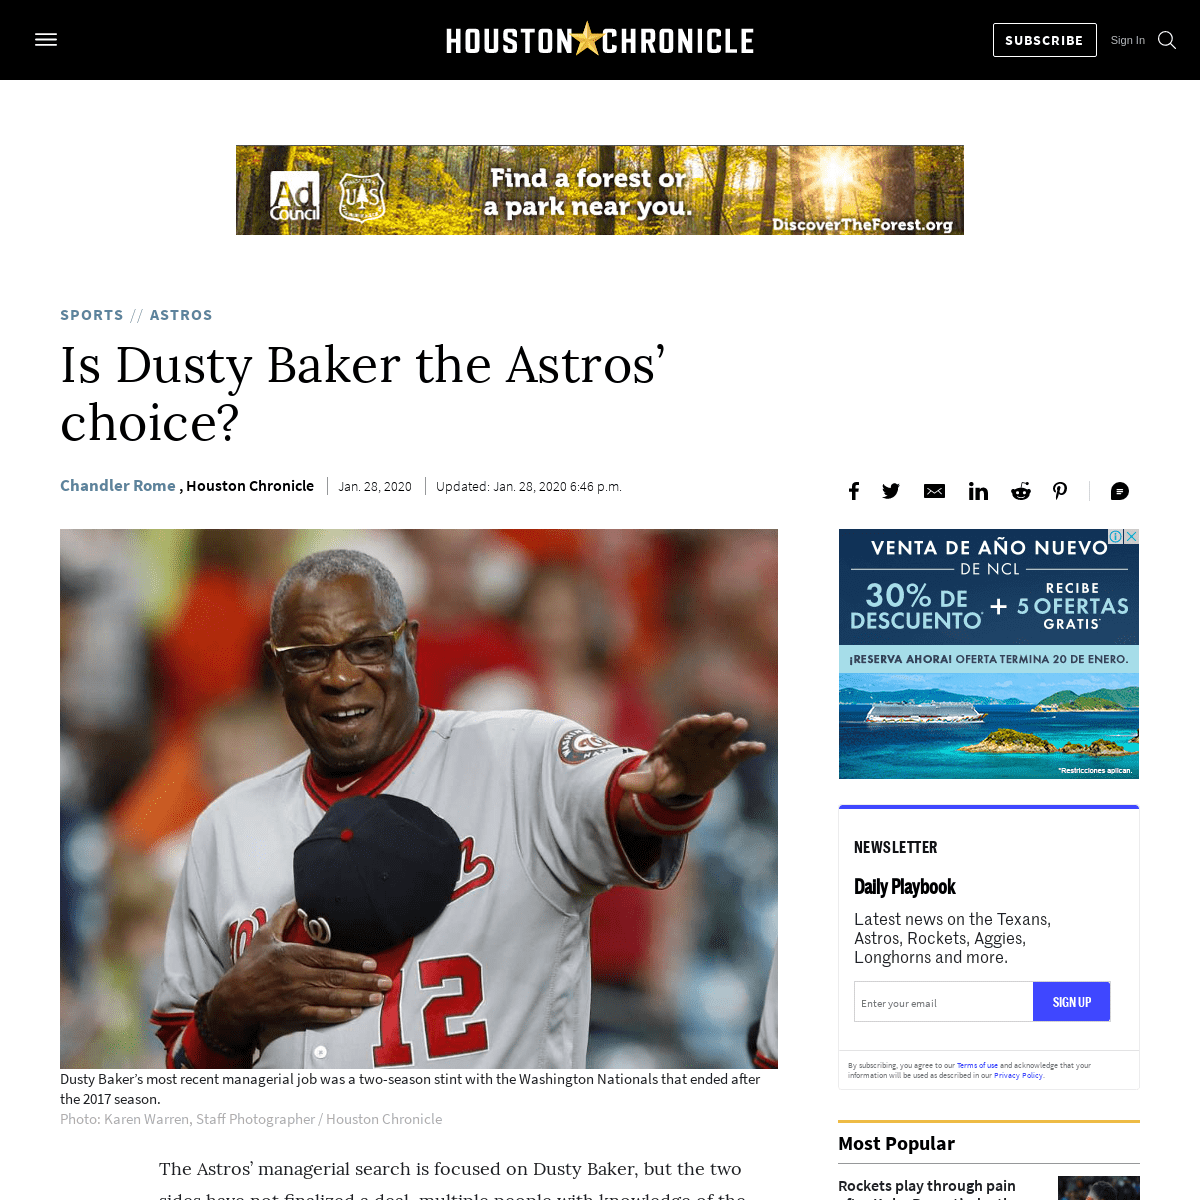 A complete backup of www.houstonchronicle.com/sports/astros/article/Is-Dusty-Baker-the-Astros-choice-15011793.php